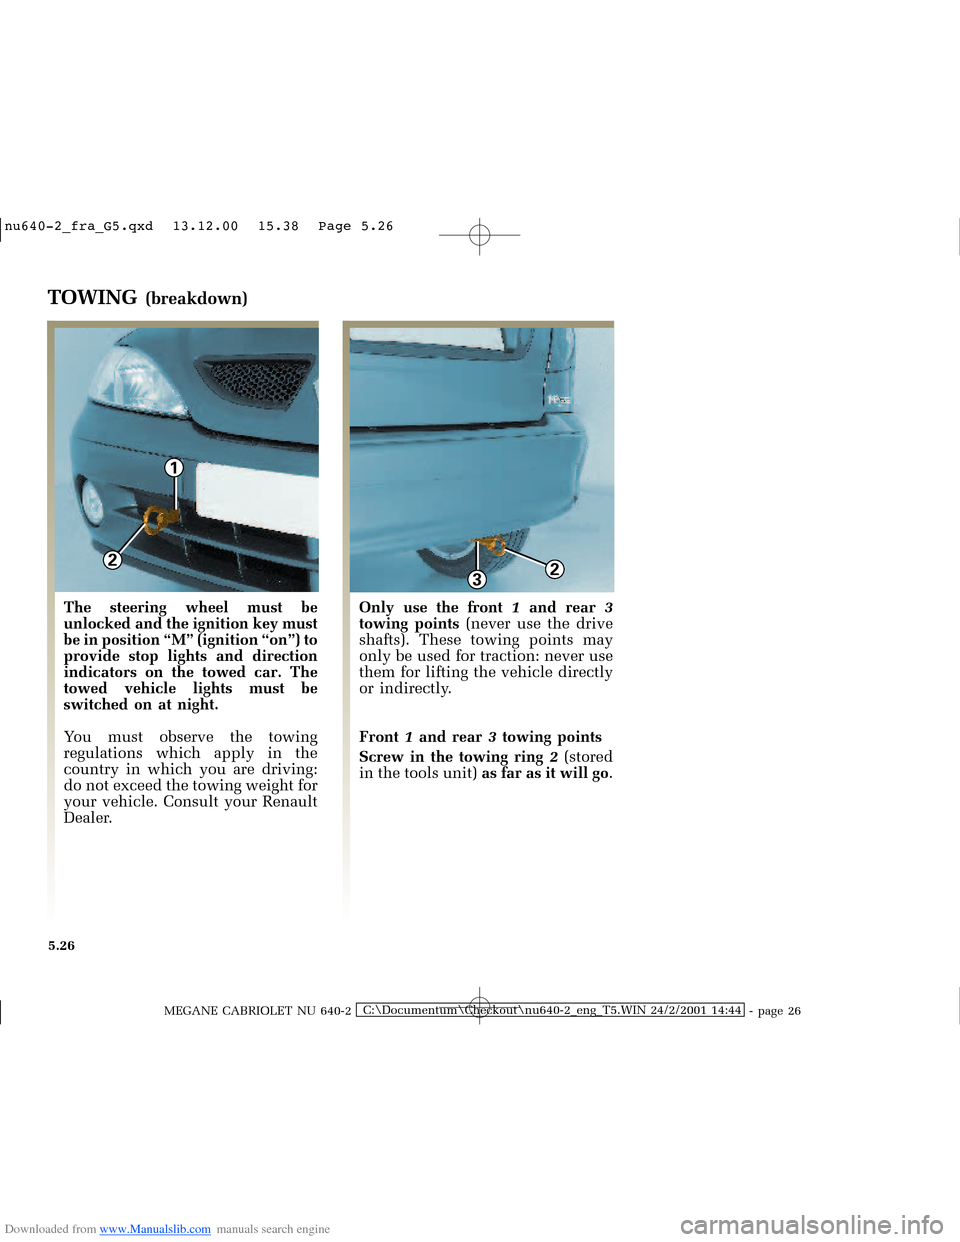 RENAULT MEGANE 2000 X64 / 1.G Owners Manual Downloaded from www.Manualslib.com manuals search engine 2
1
23
�Q�X������B�I�U�D�B�*���T�[�G� � ��������� � ������ � �3�D�J�H� ����
MEGANE CABRIOLET NU 640-2C:\Document